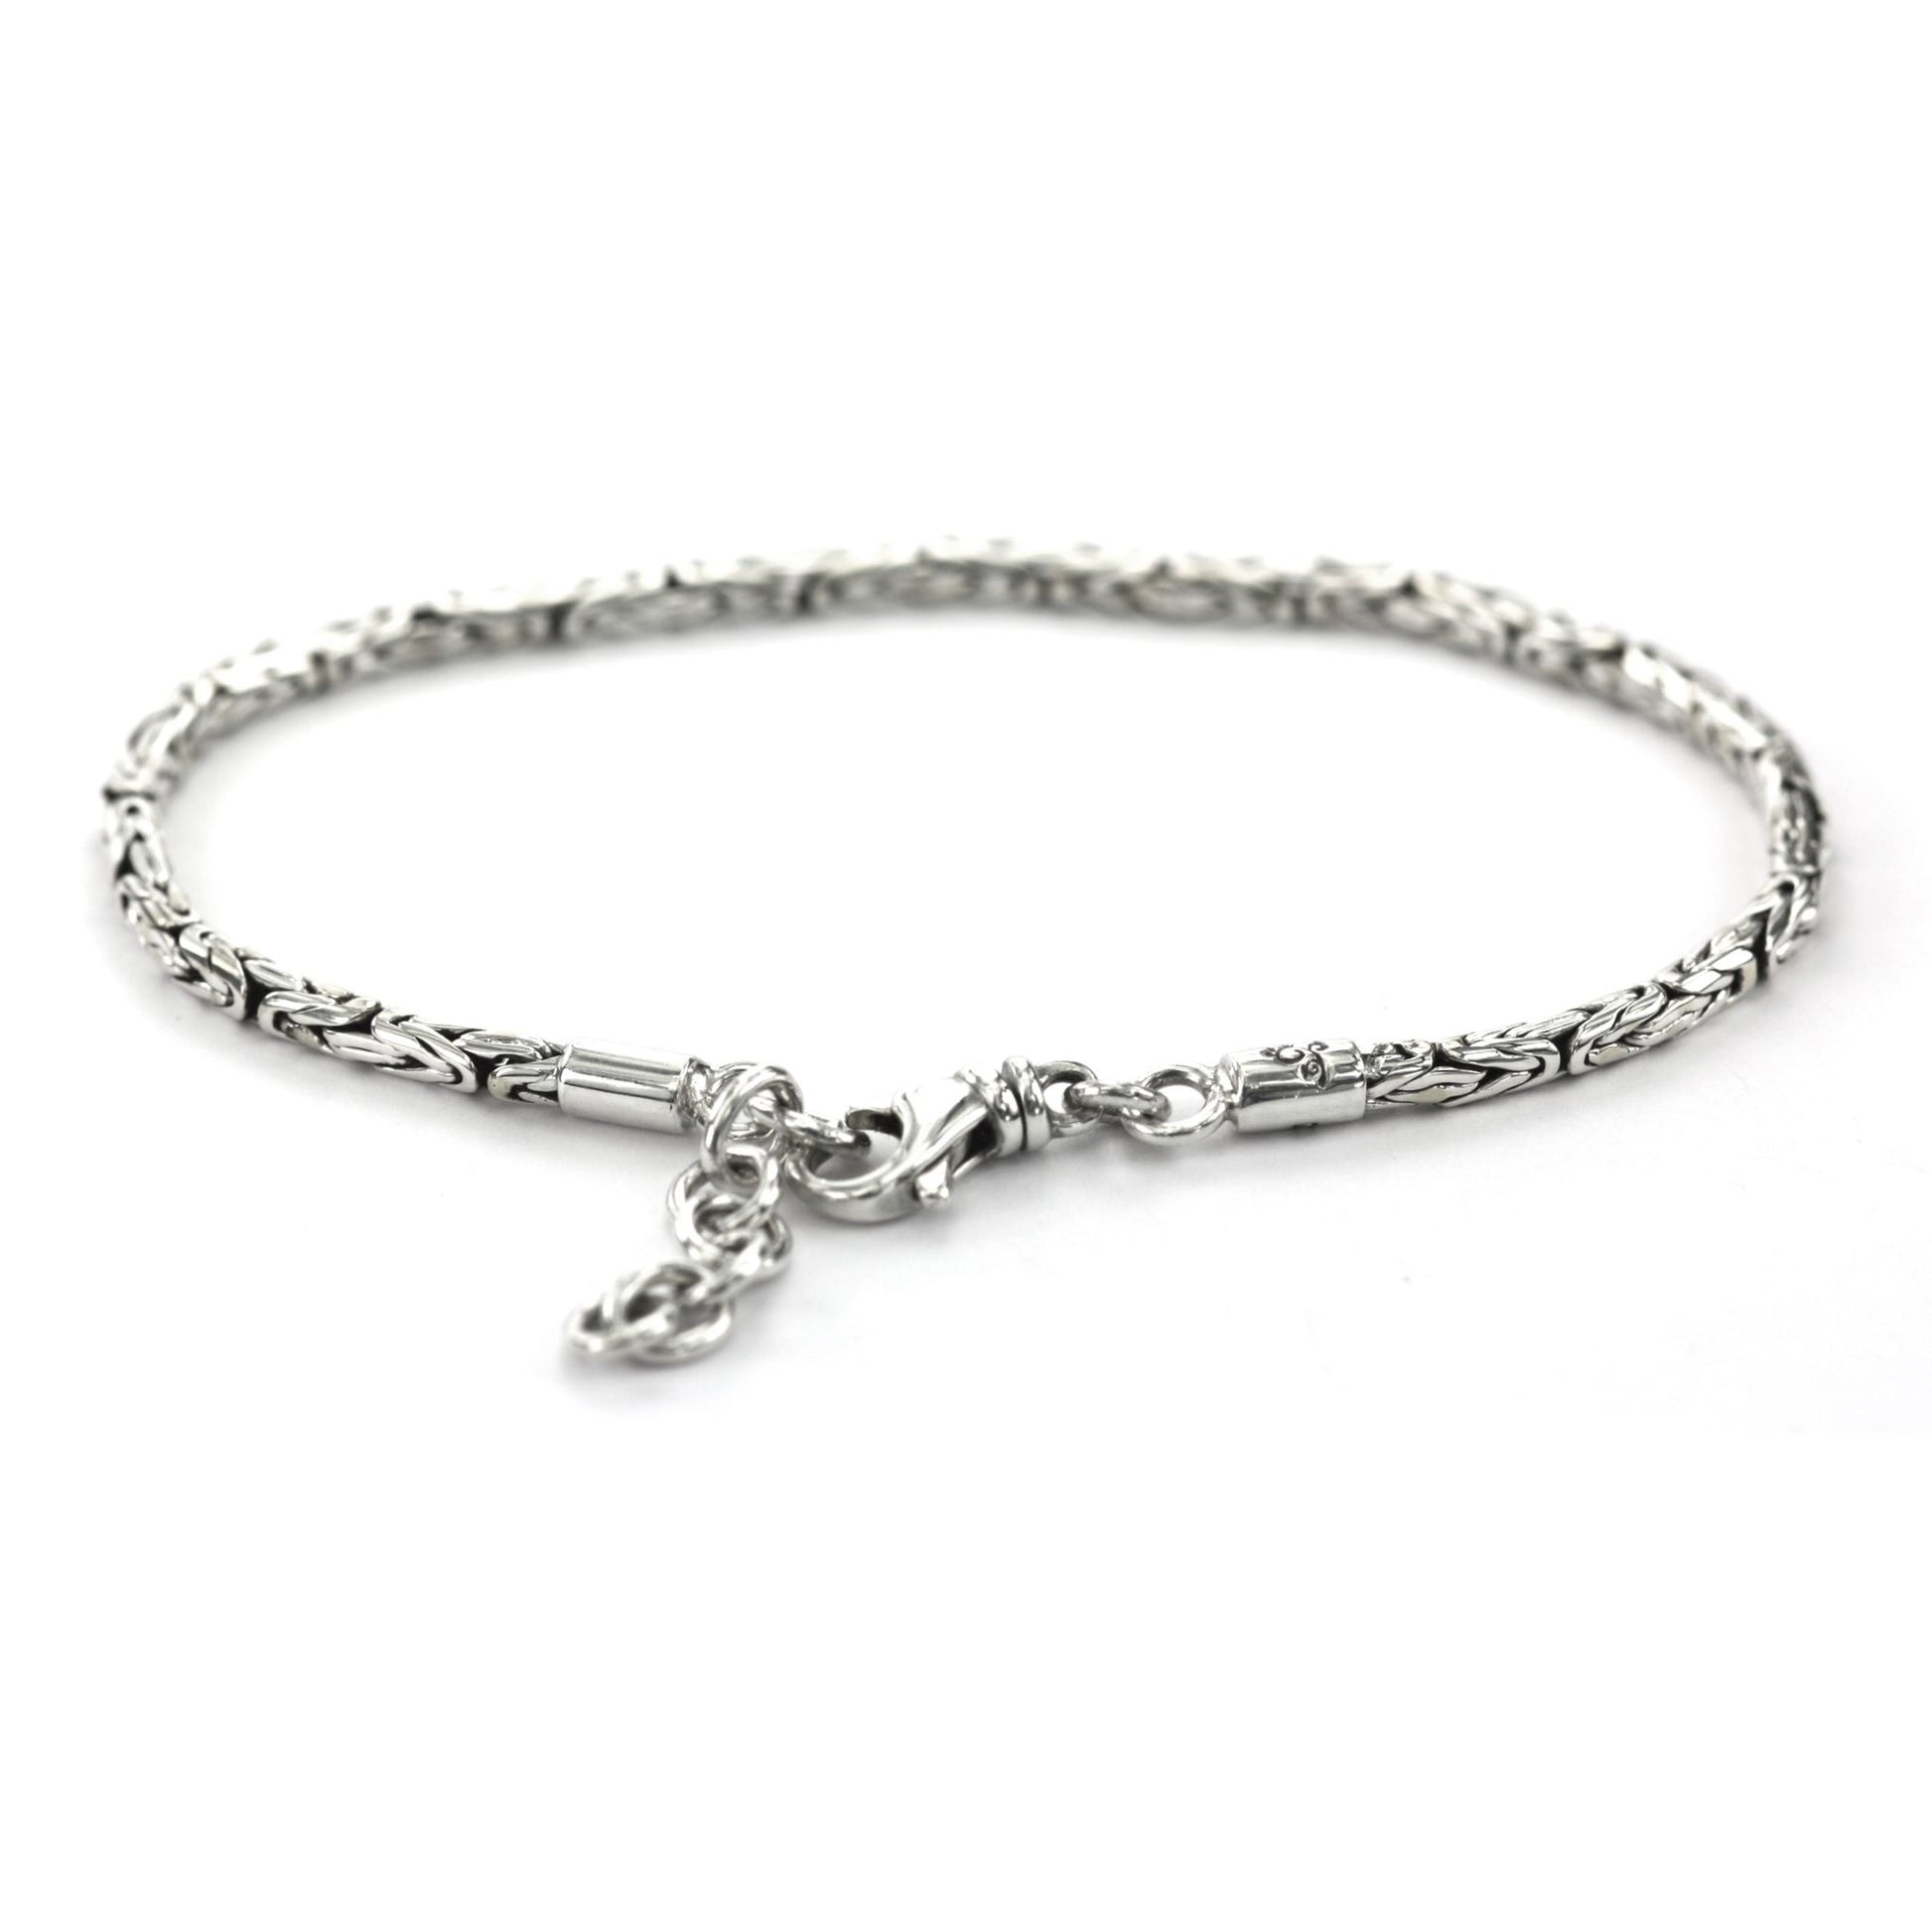 Silver byzantine chain bracelet with a lobster clasp.